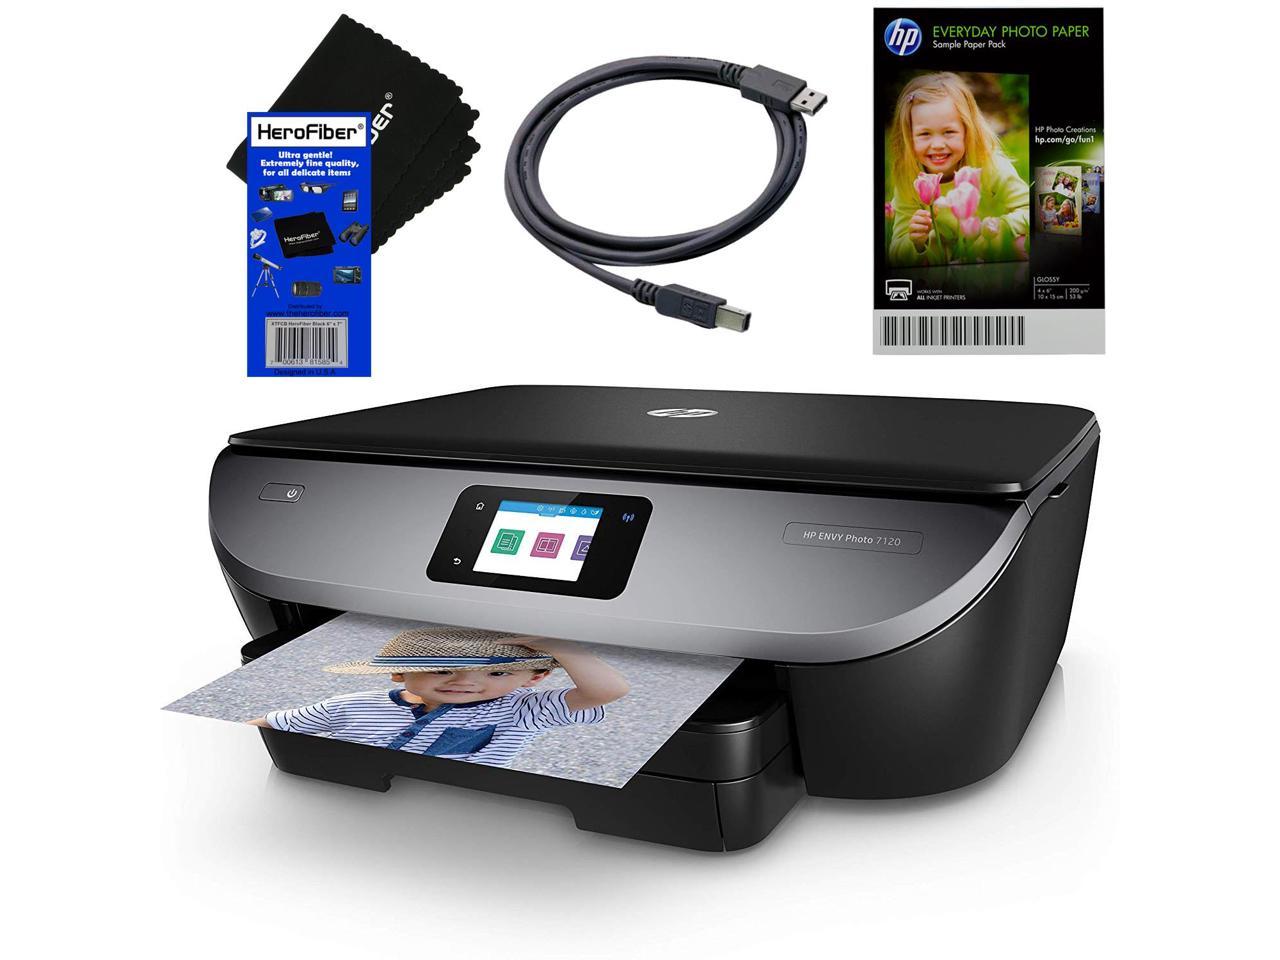 HP Photo Printer All-in-One Wireless Envy 7120 with Scanner & Copier + Ink Cartridges & Optional Instant Ink Subscription + USB Cable, Sample Photo Paper & HeroFiber